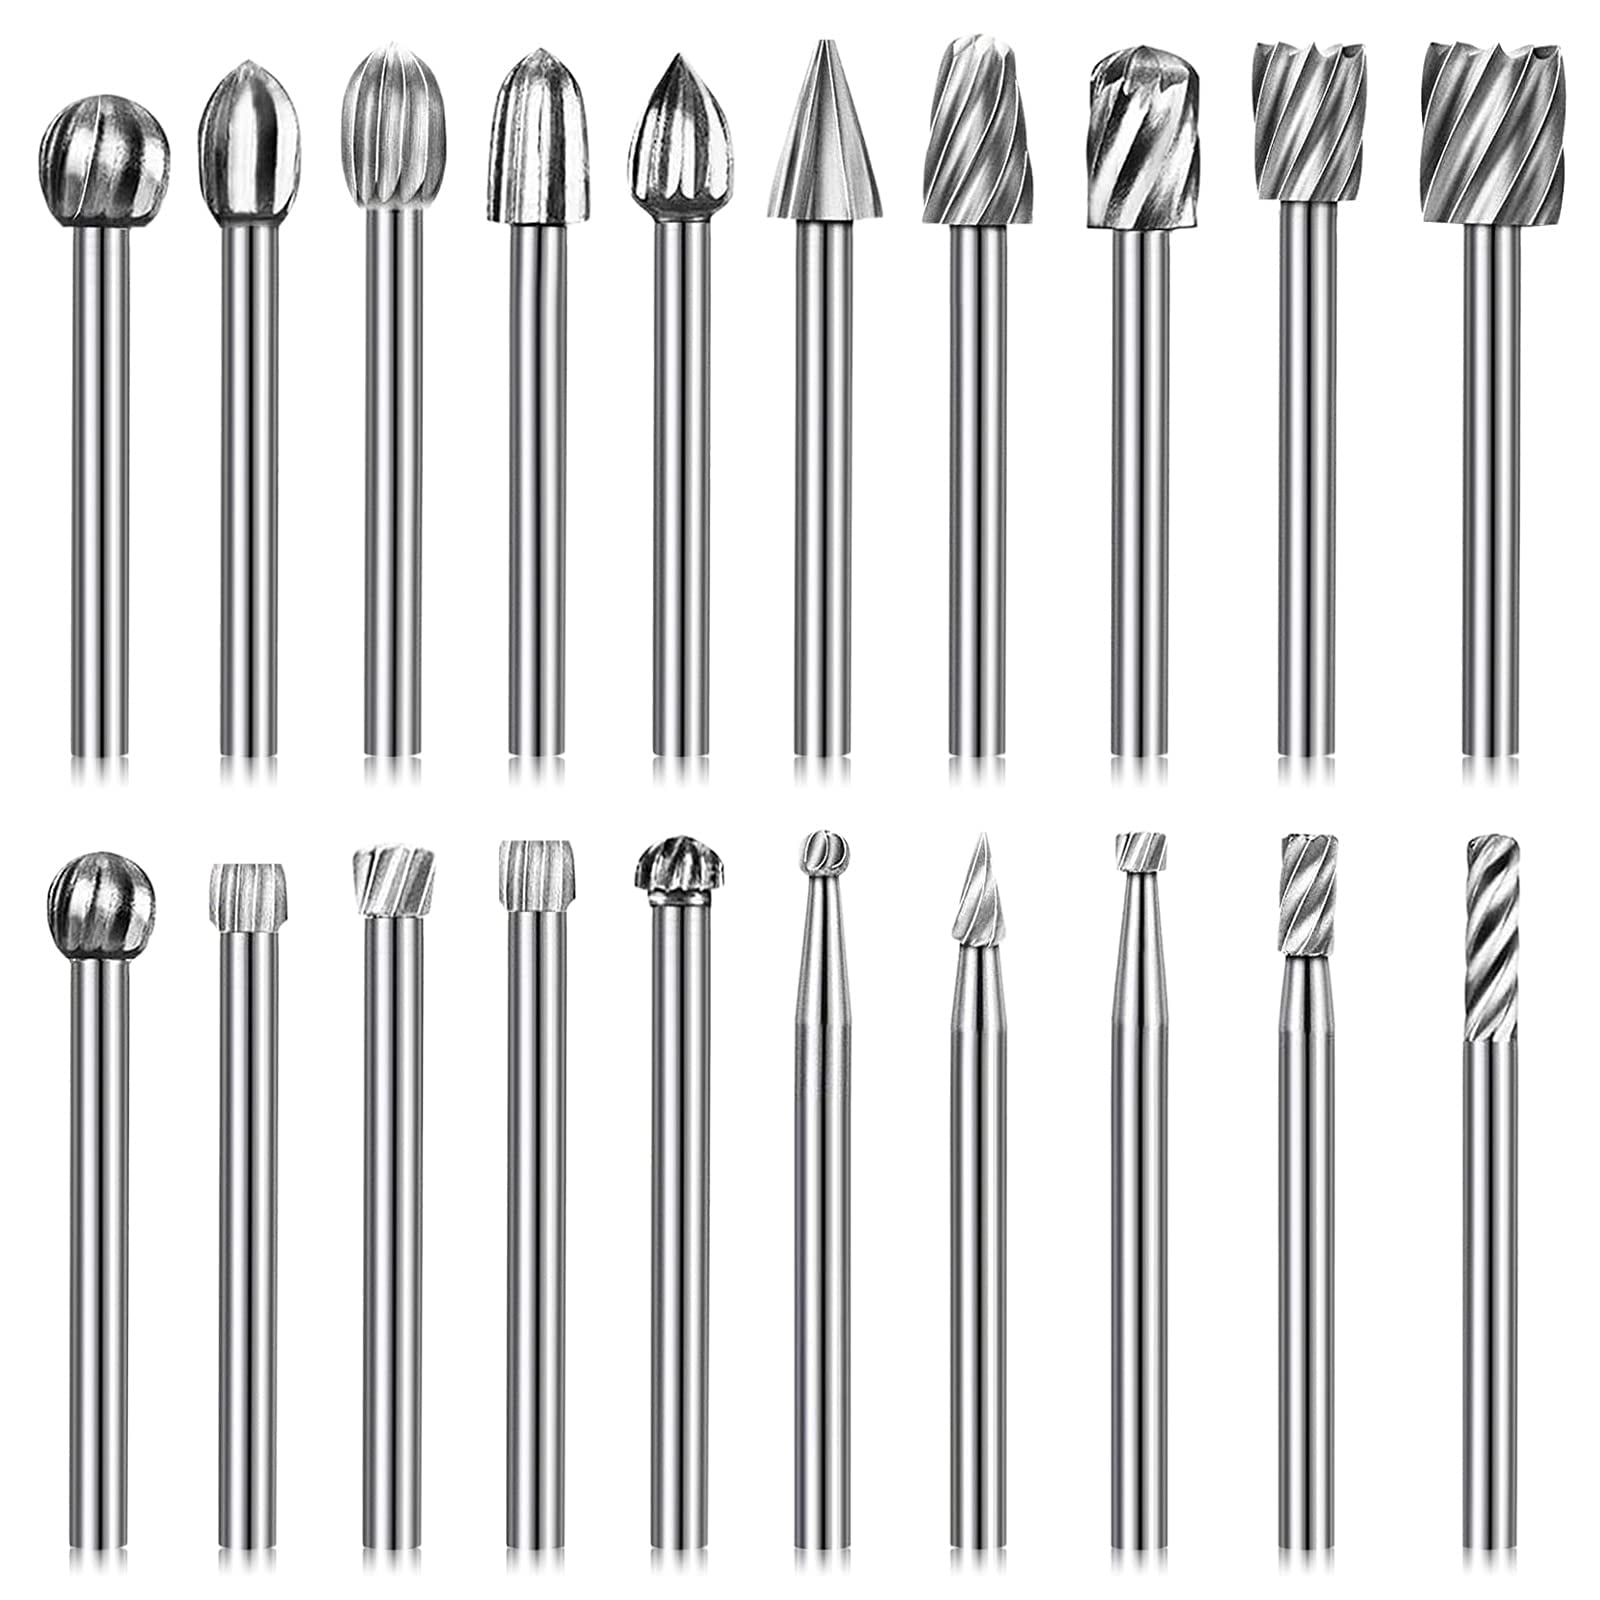 Aporo Carving Bits for Dremel Rotary Tool Accessories, Tungsten Carbide  Burr Set Double Cutter 1/8 inch Shank for Woodworking